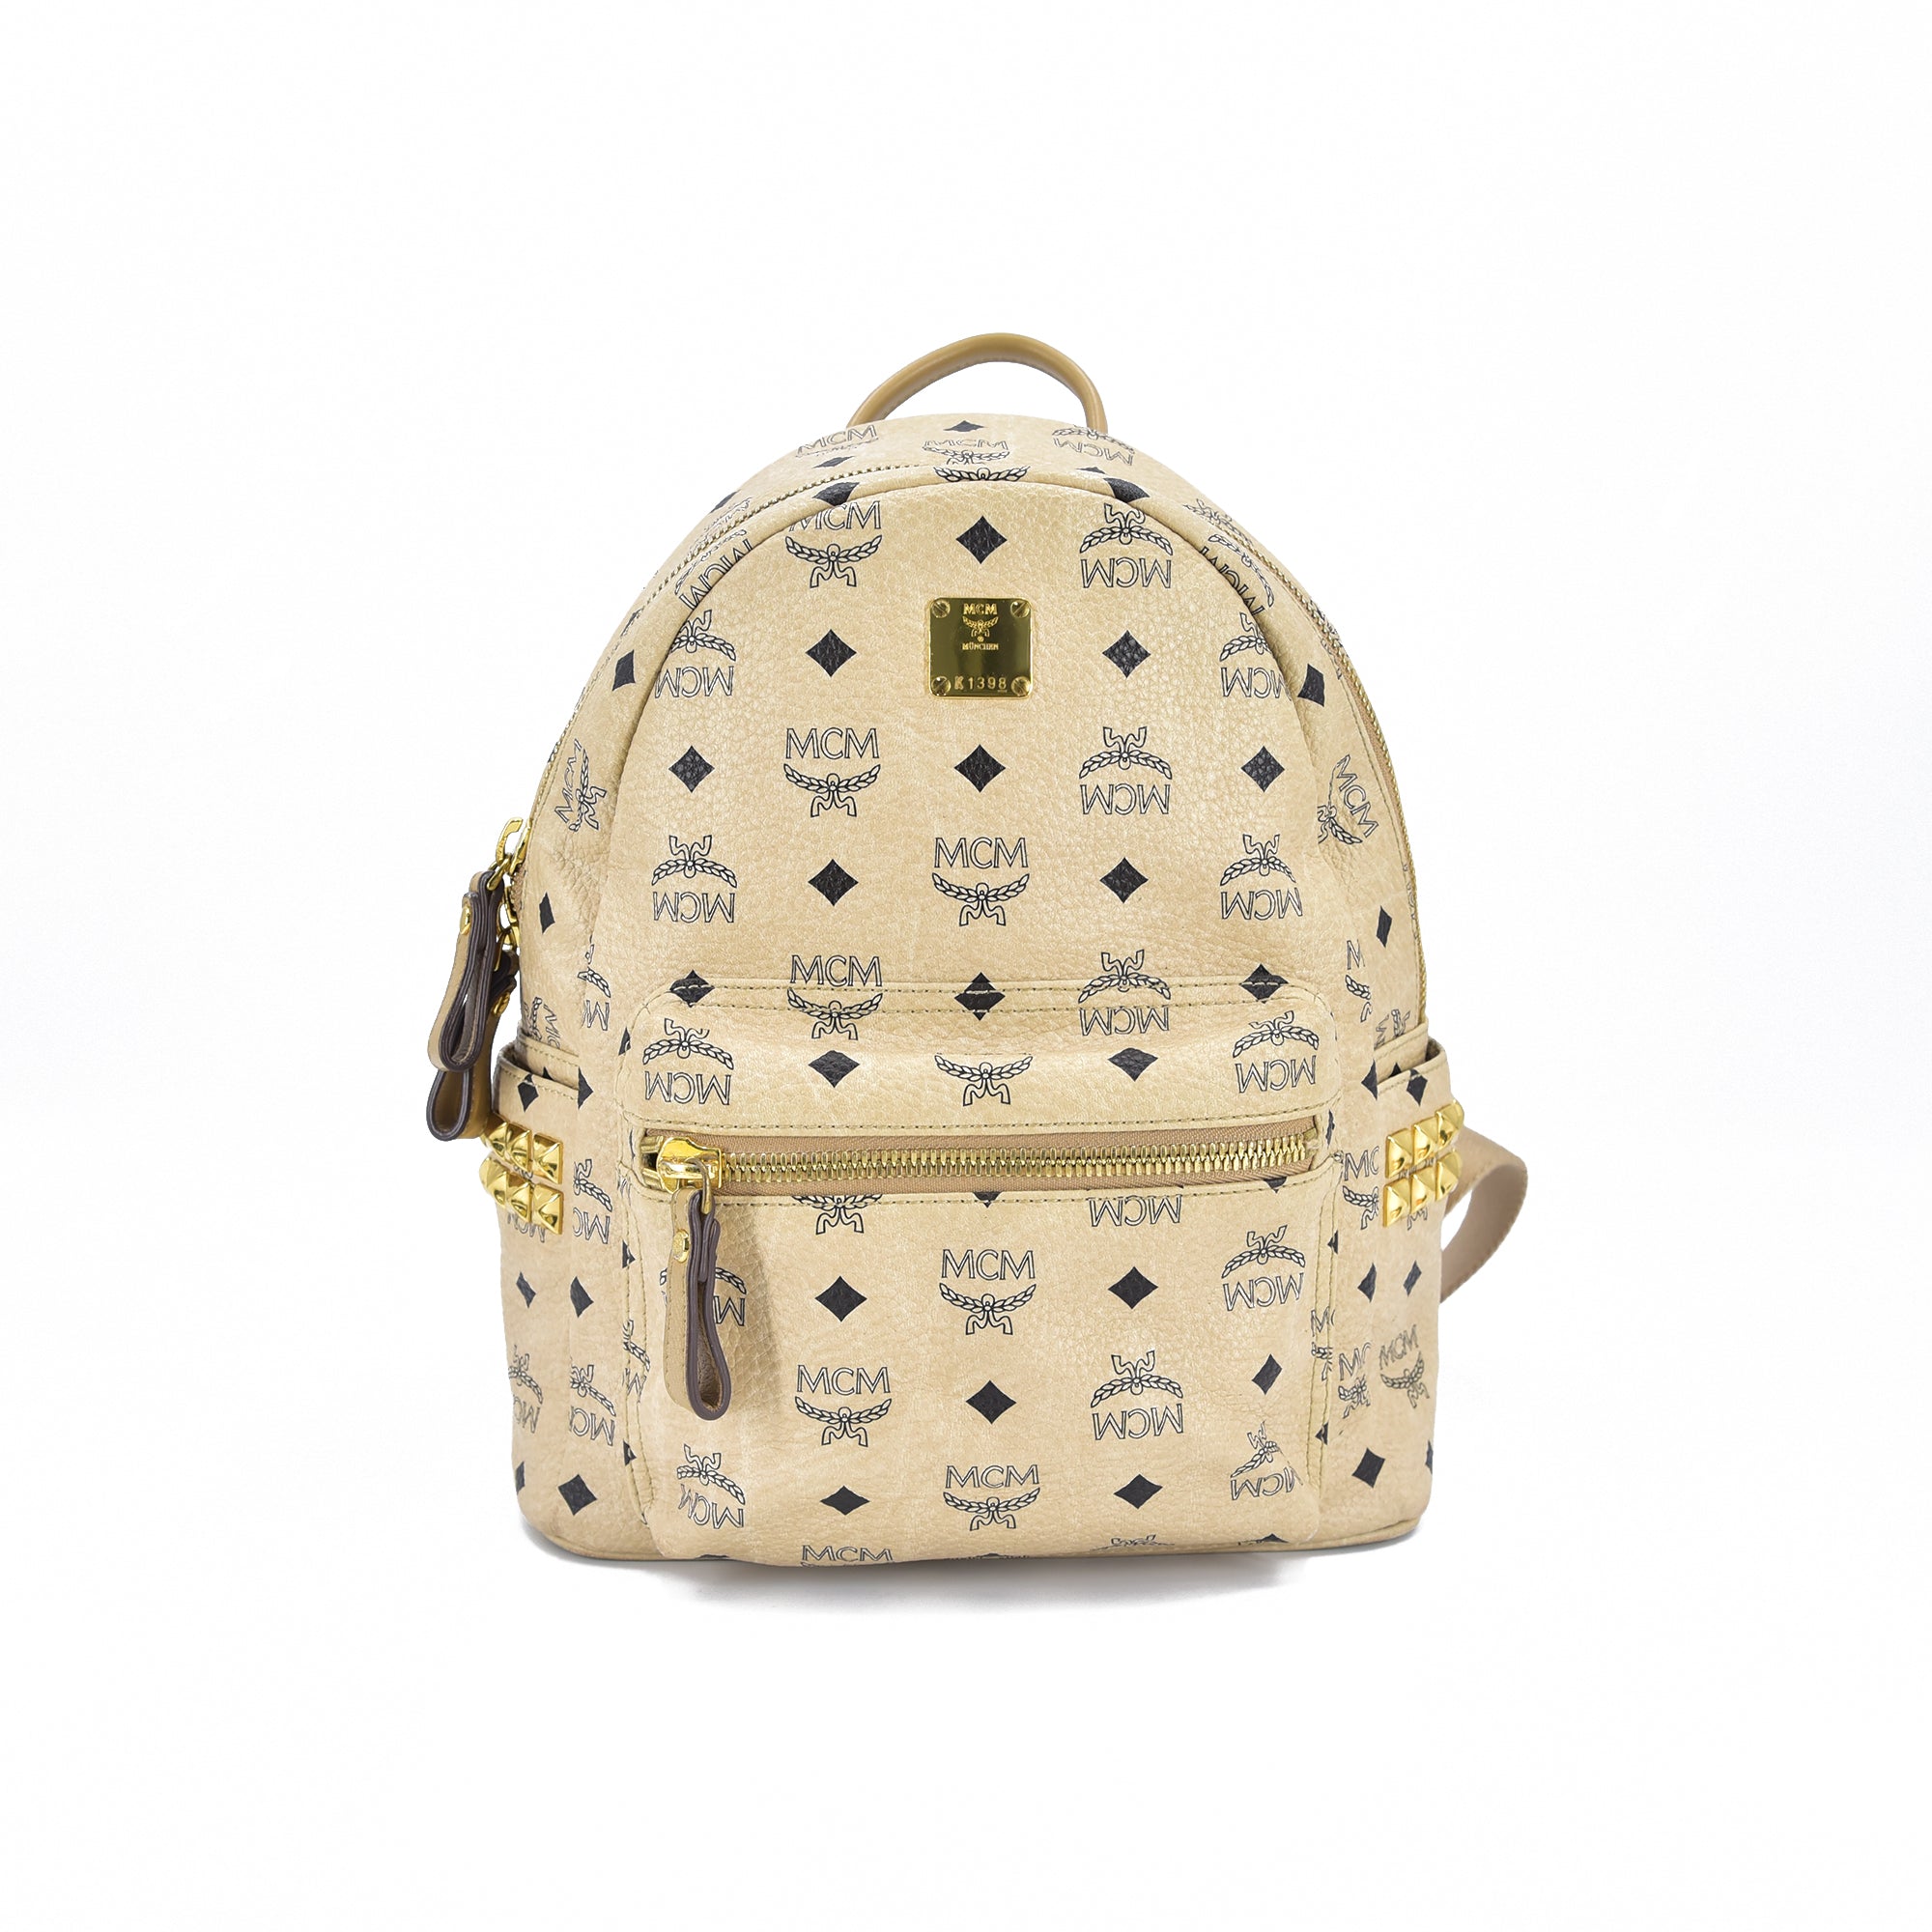 Visetos Leather Small Stark Backpack K1398